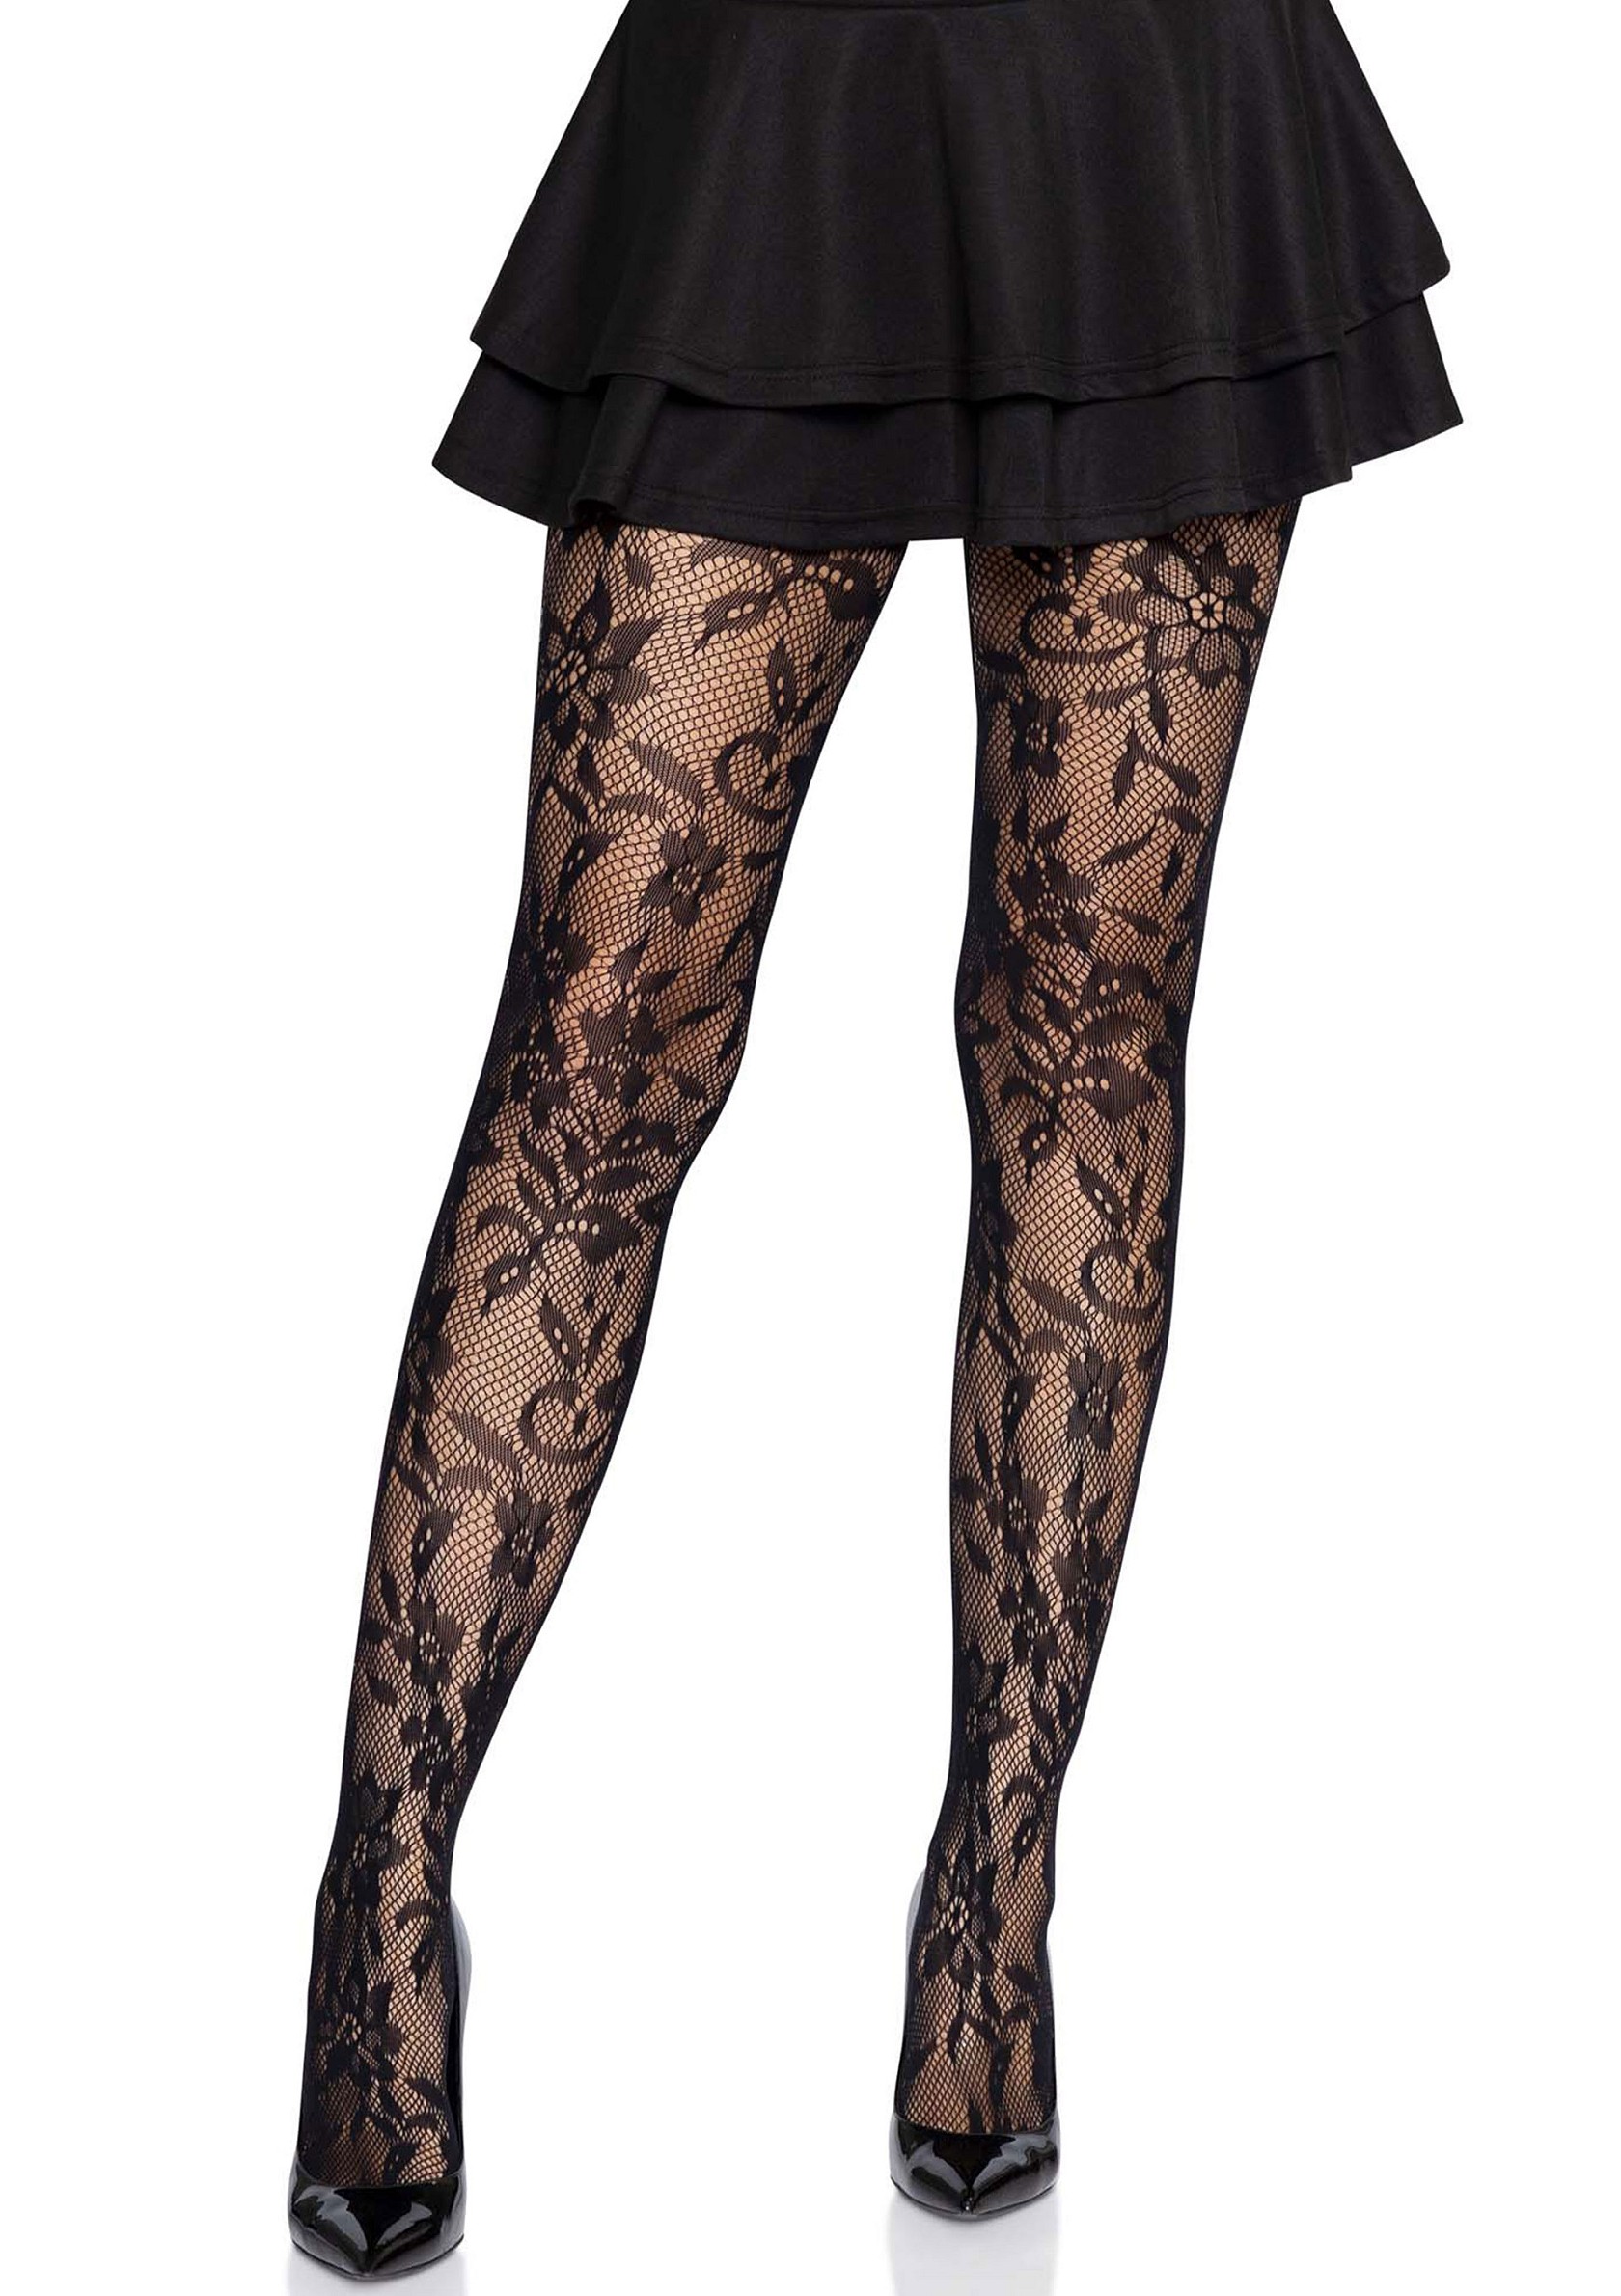 Seamless Floral Lace Tights